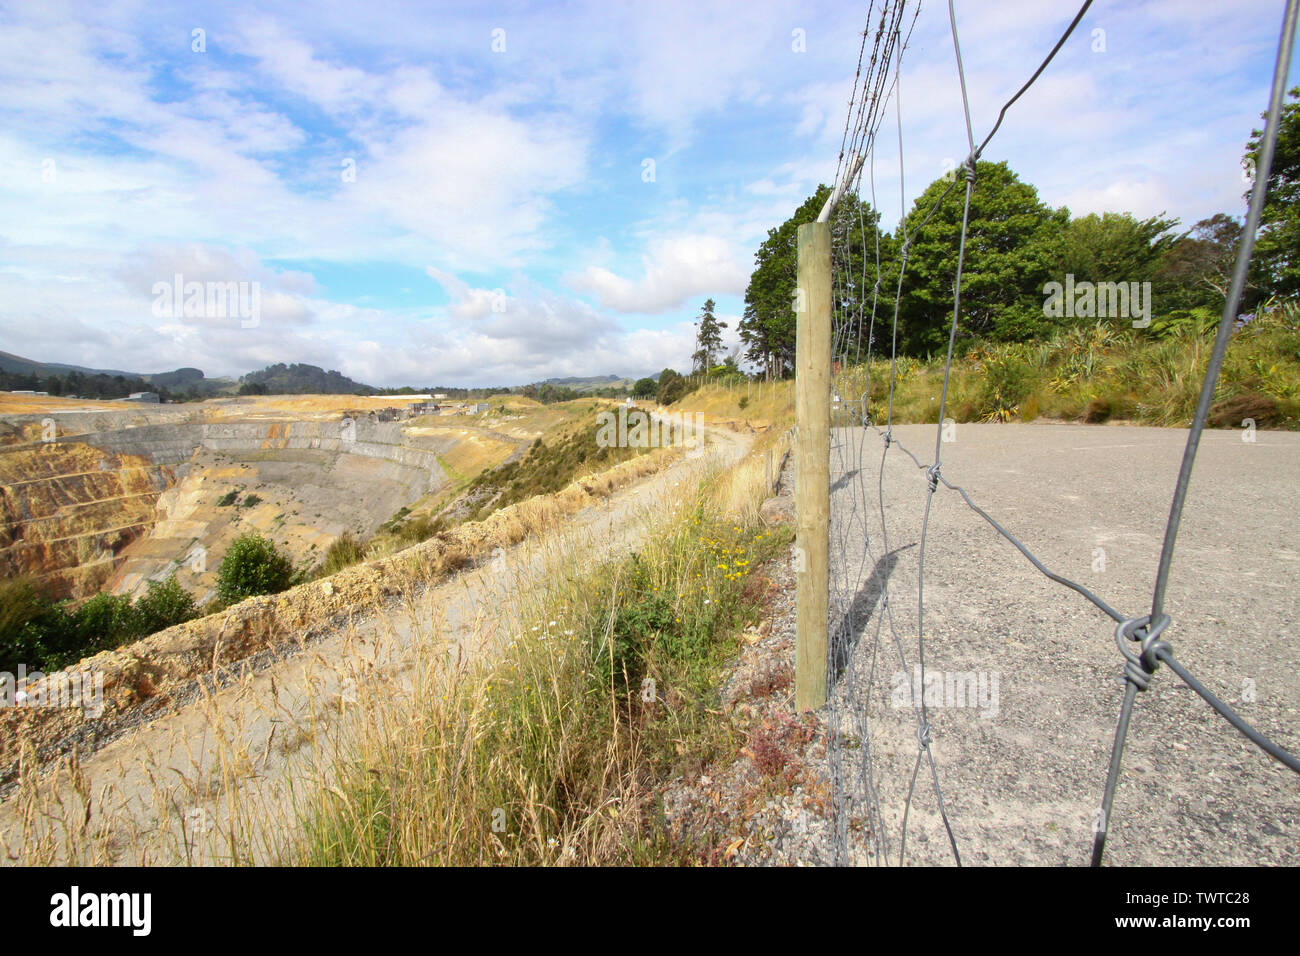 The Martha Mine is a open-cast gold mine in the New Zealand town of Waihi. A walkway is installed around the goldmine to allow visitors to explore the Stock Photo